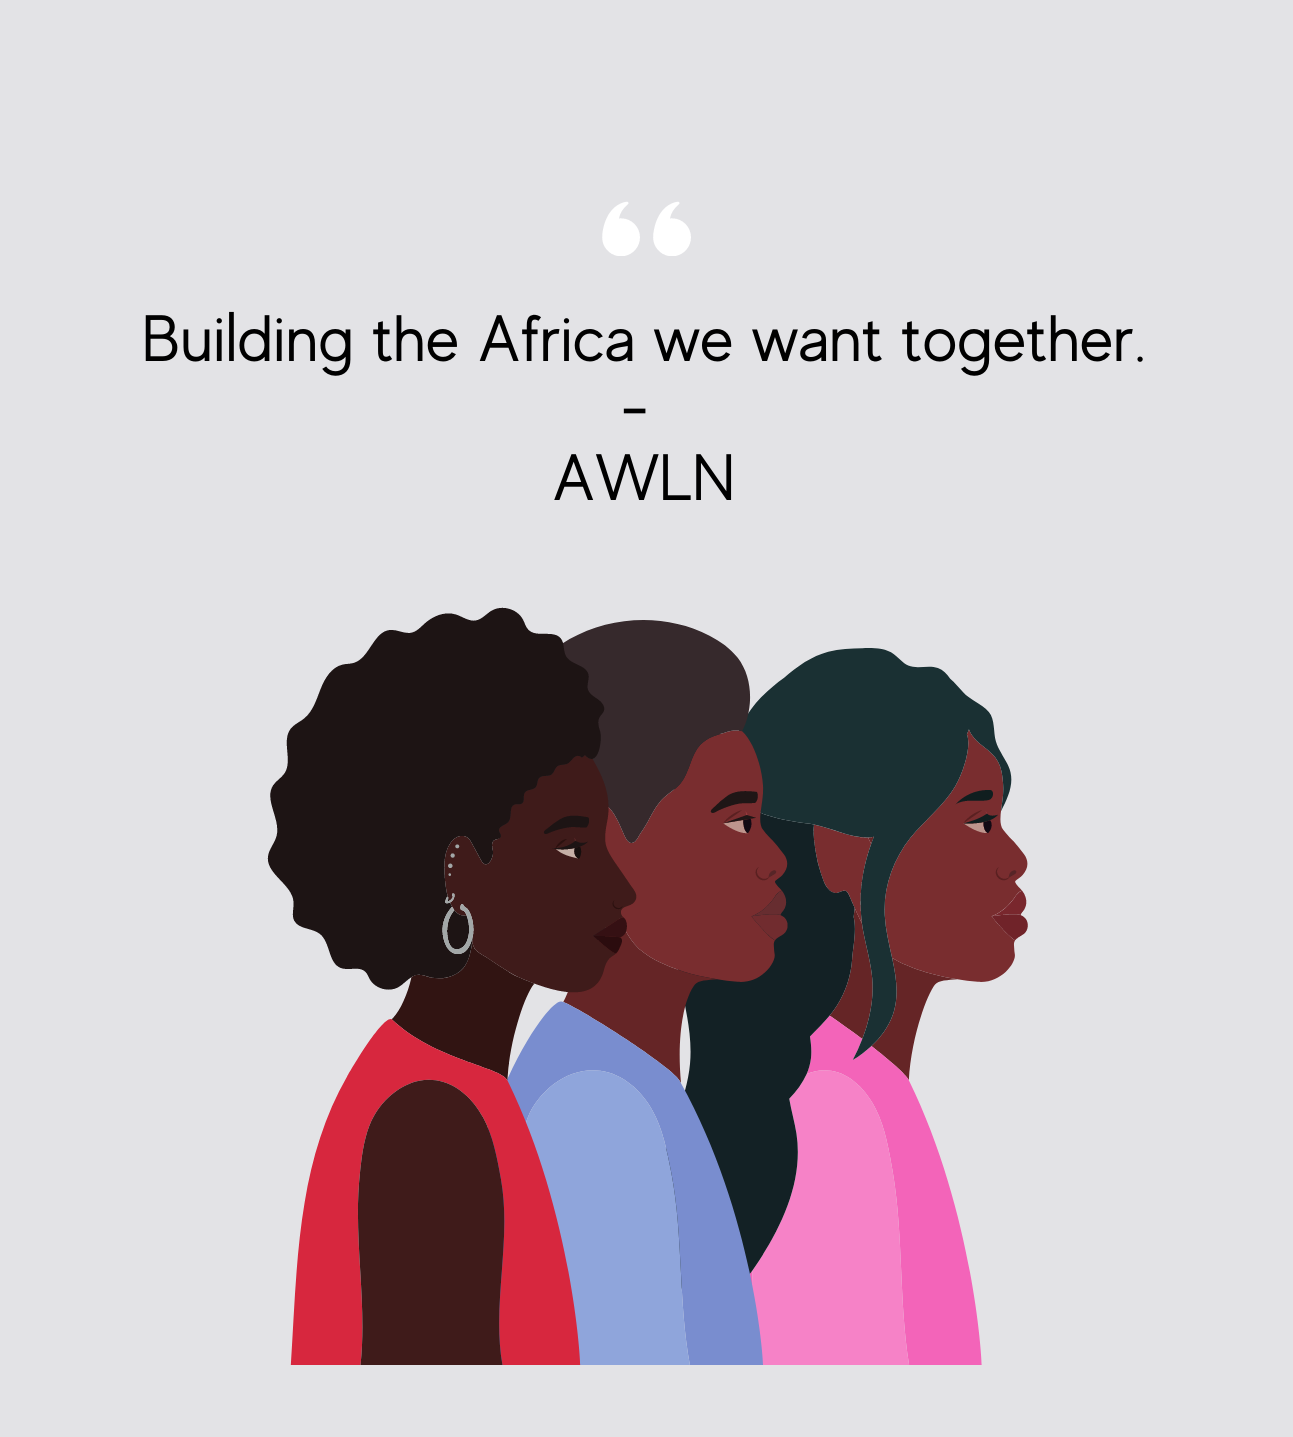 Building the Africa we want together - AWLN